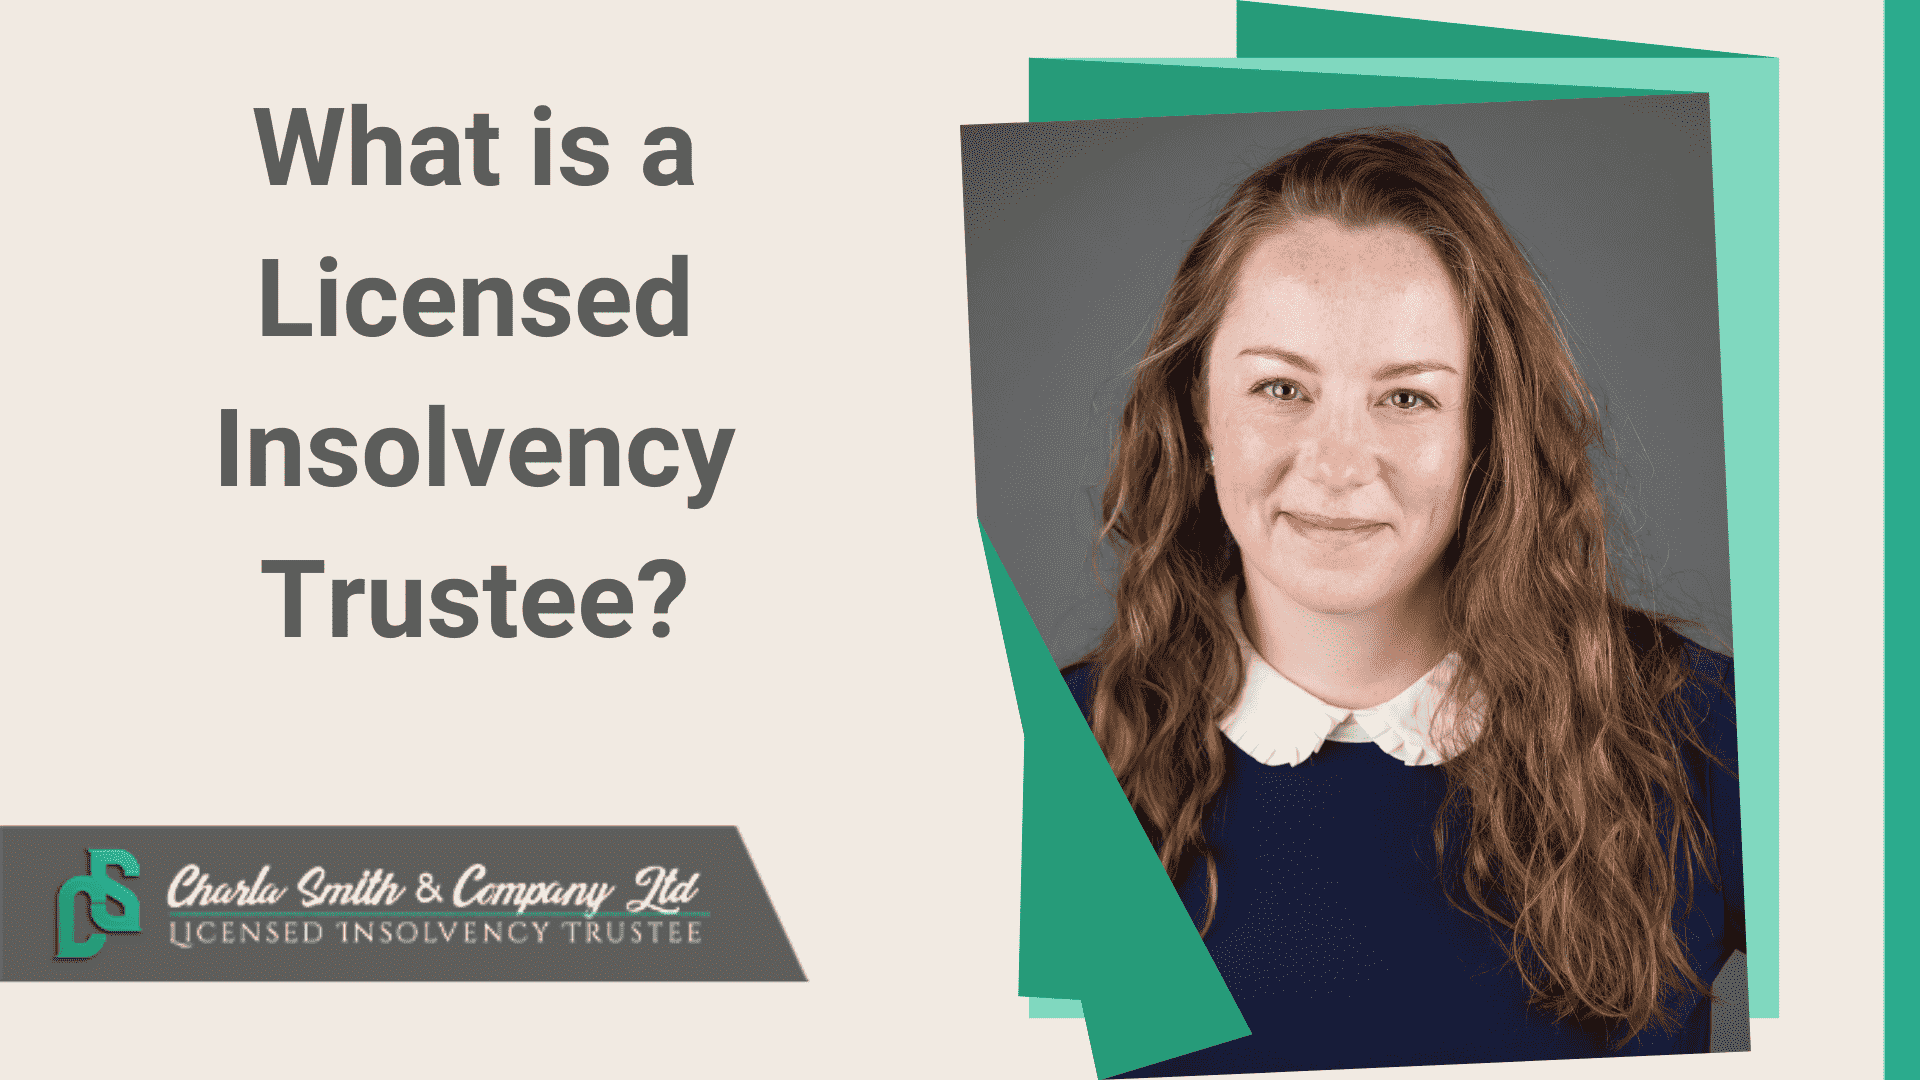 What is a Licensed Insolvency Trustee?